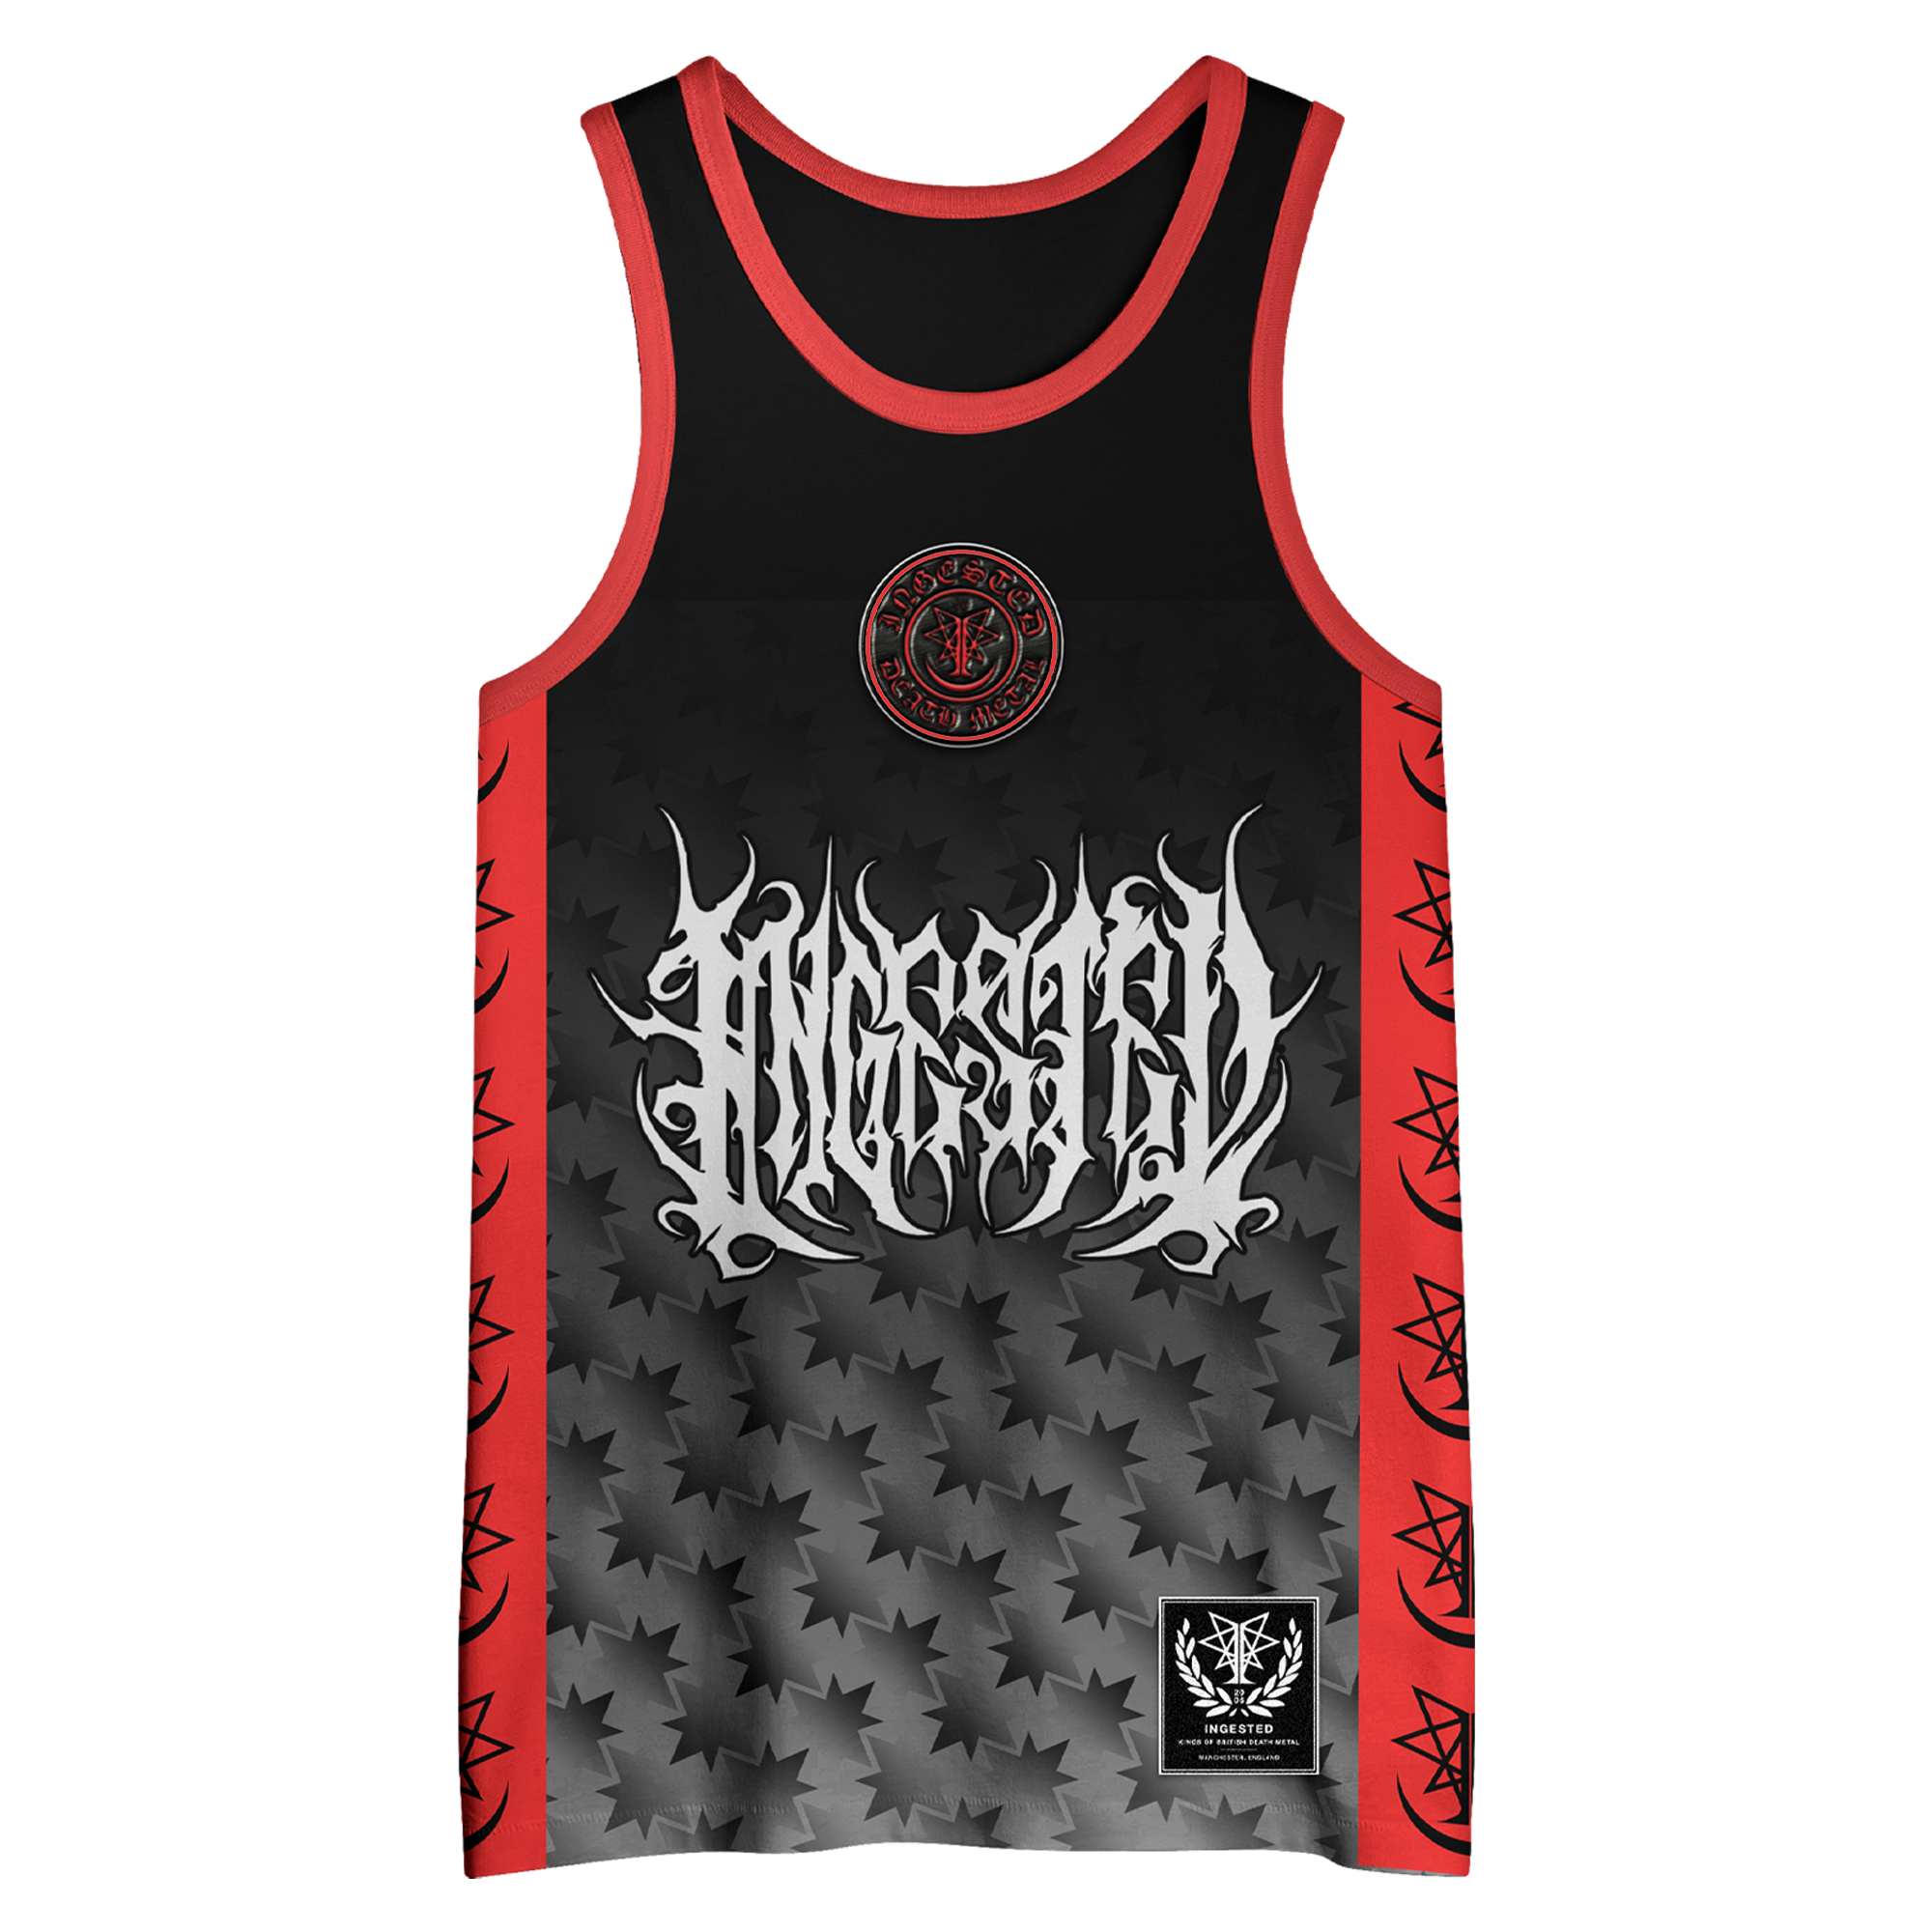 Ingested - Basketball Jersey